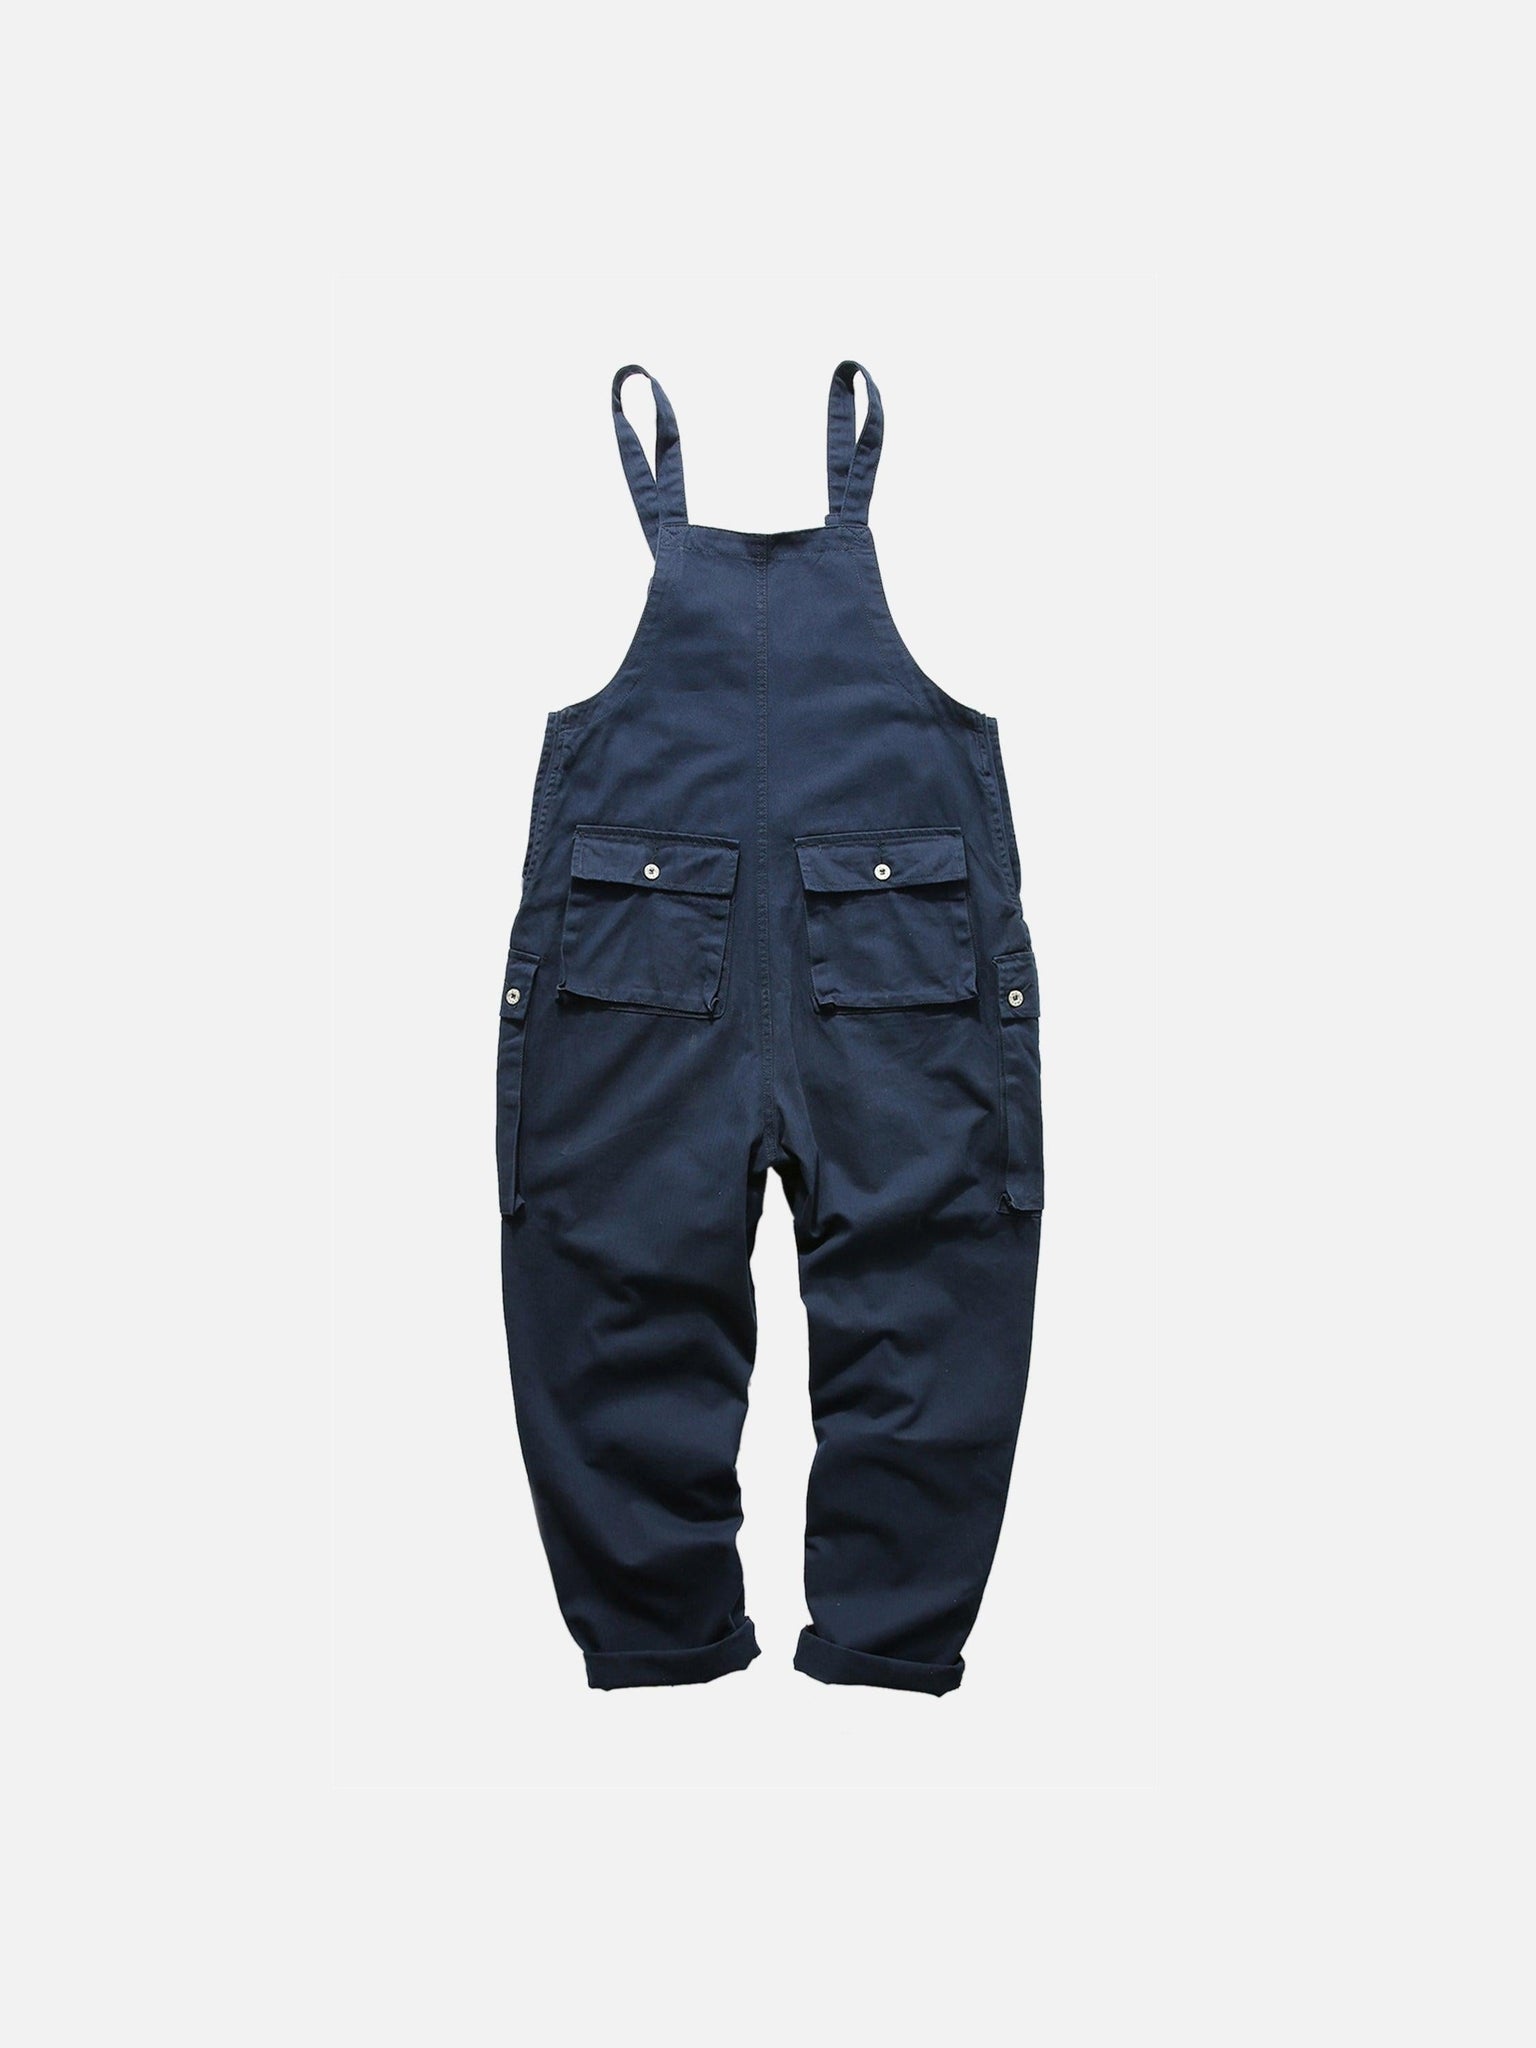 Thesupermade Cargo Overall Pants